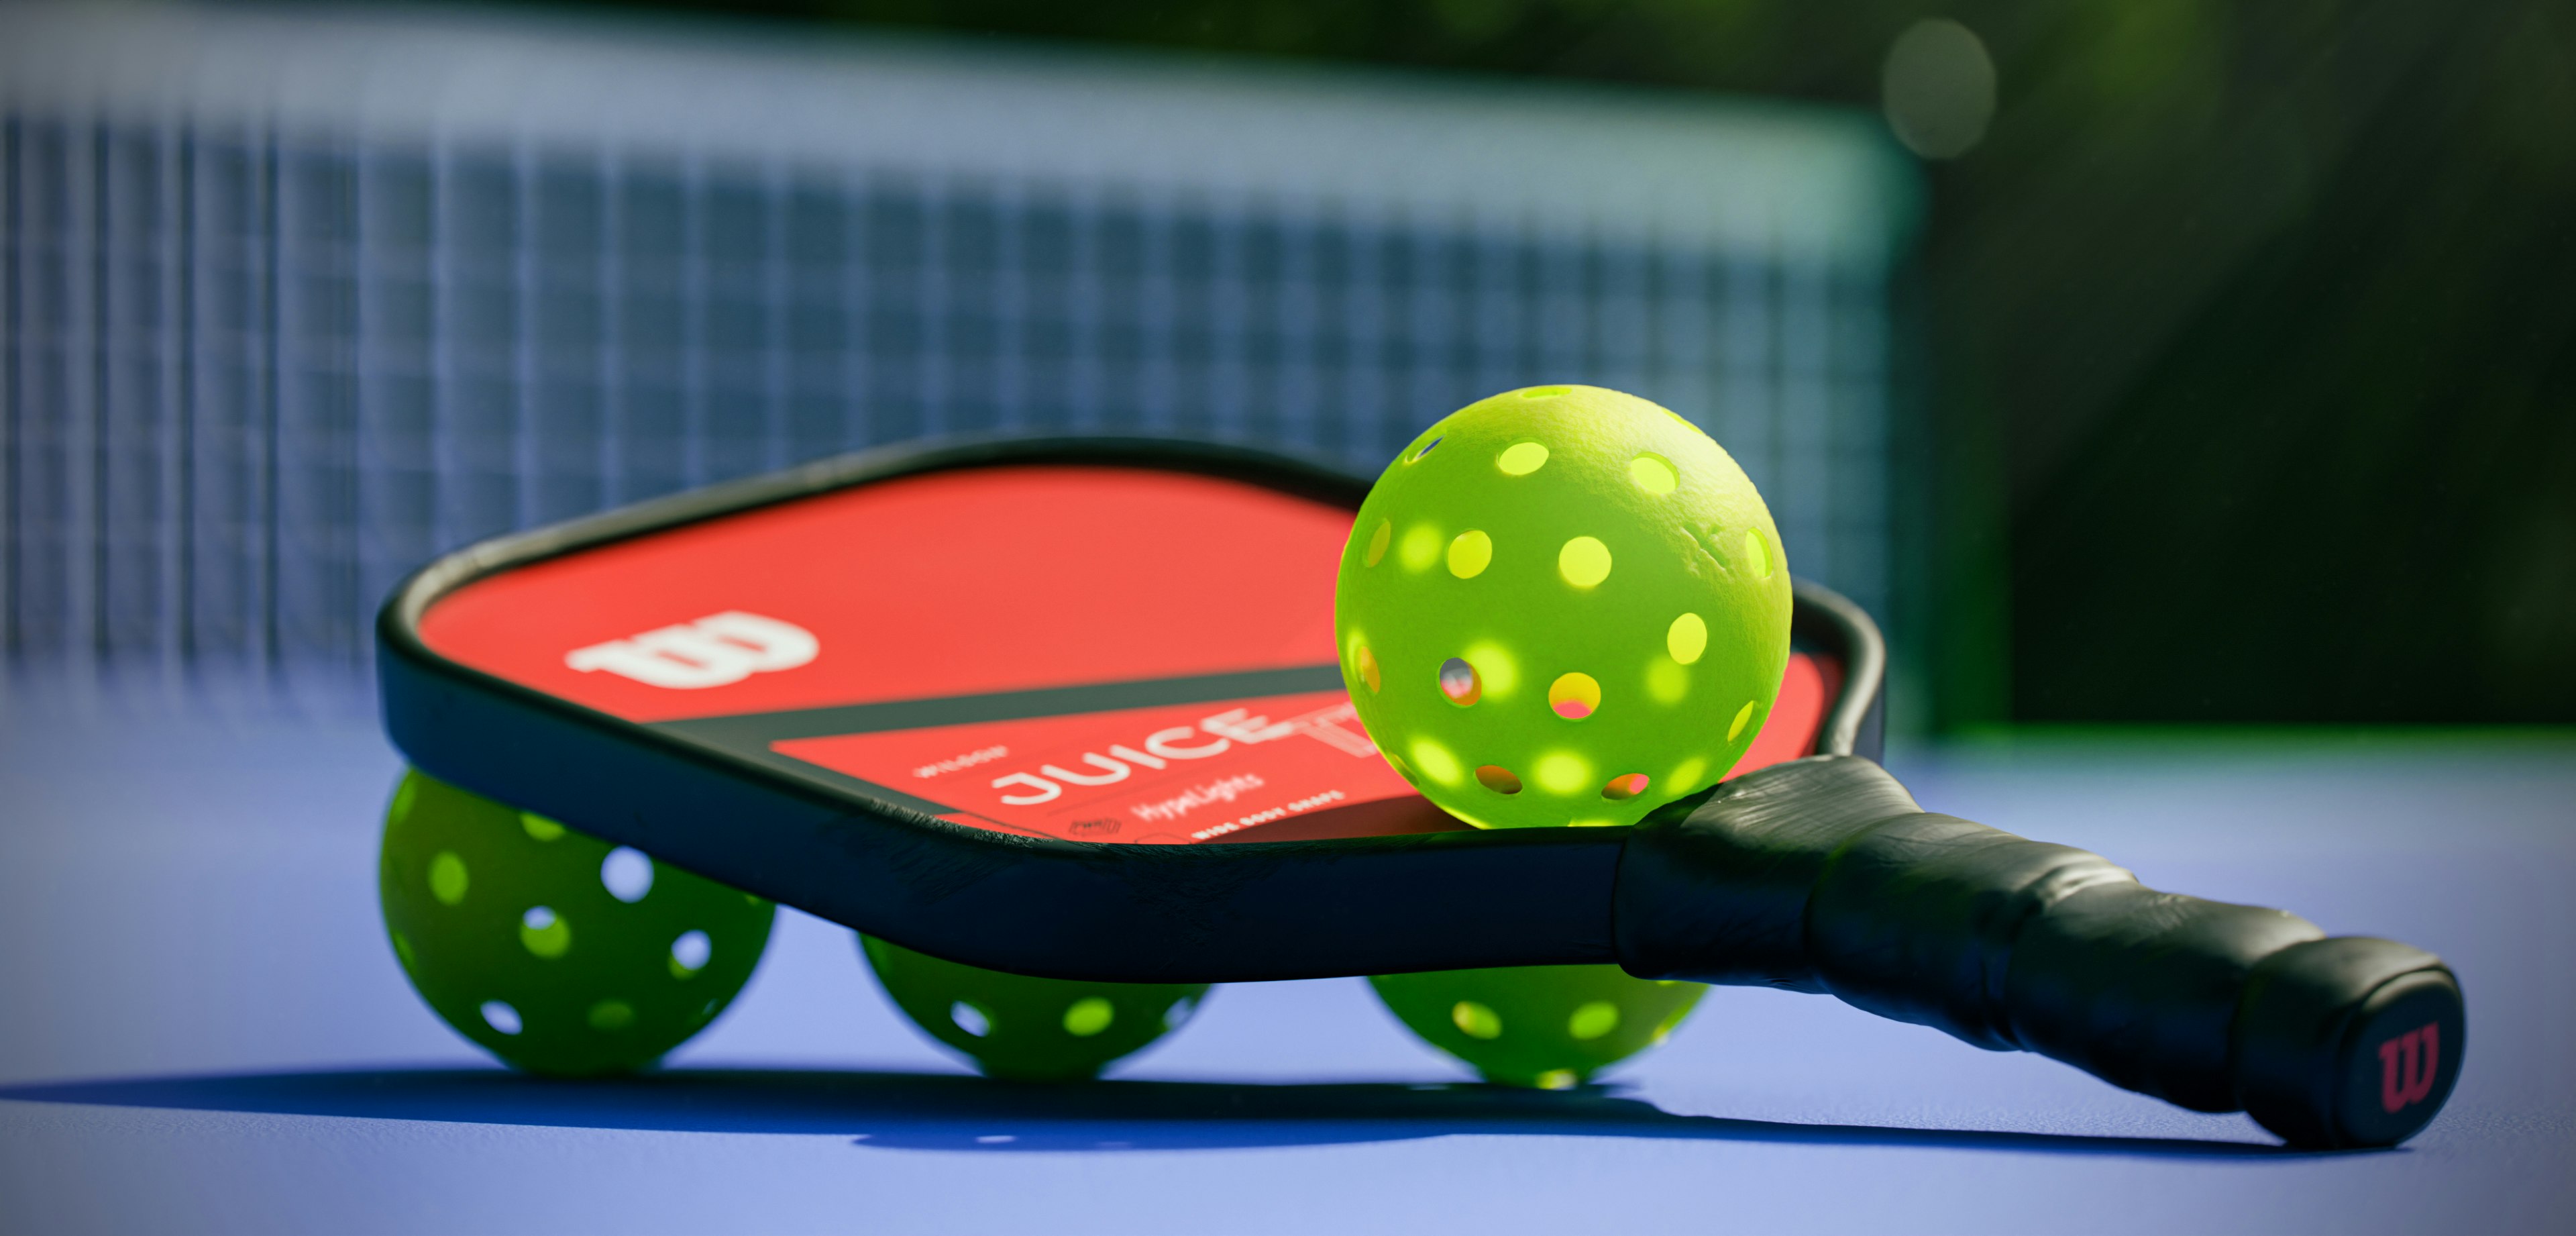 What is the Difference Between Padel and Pickleball?